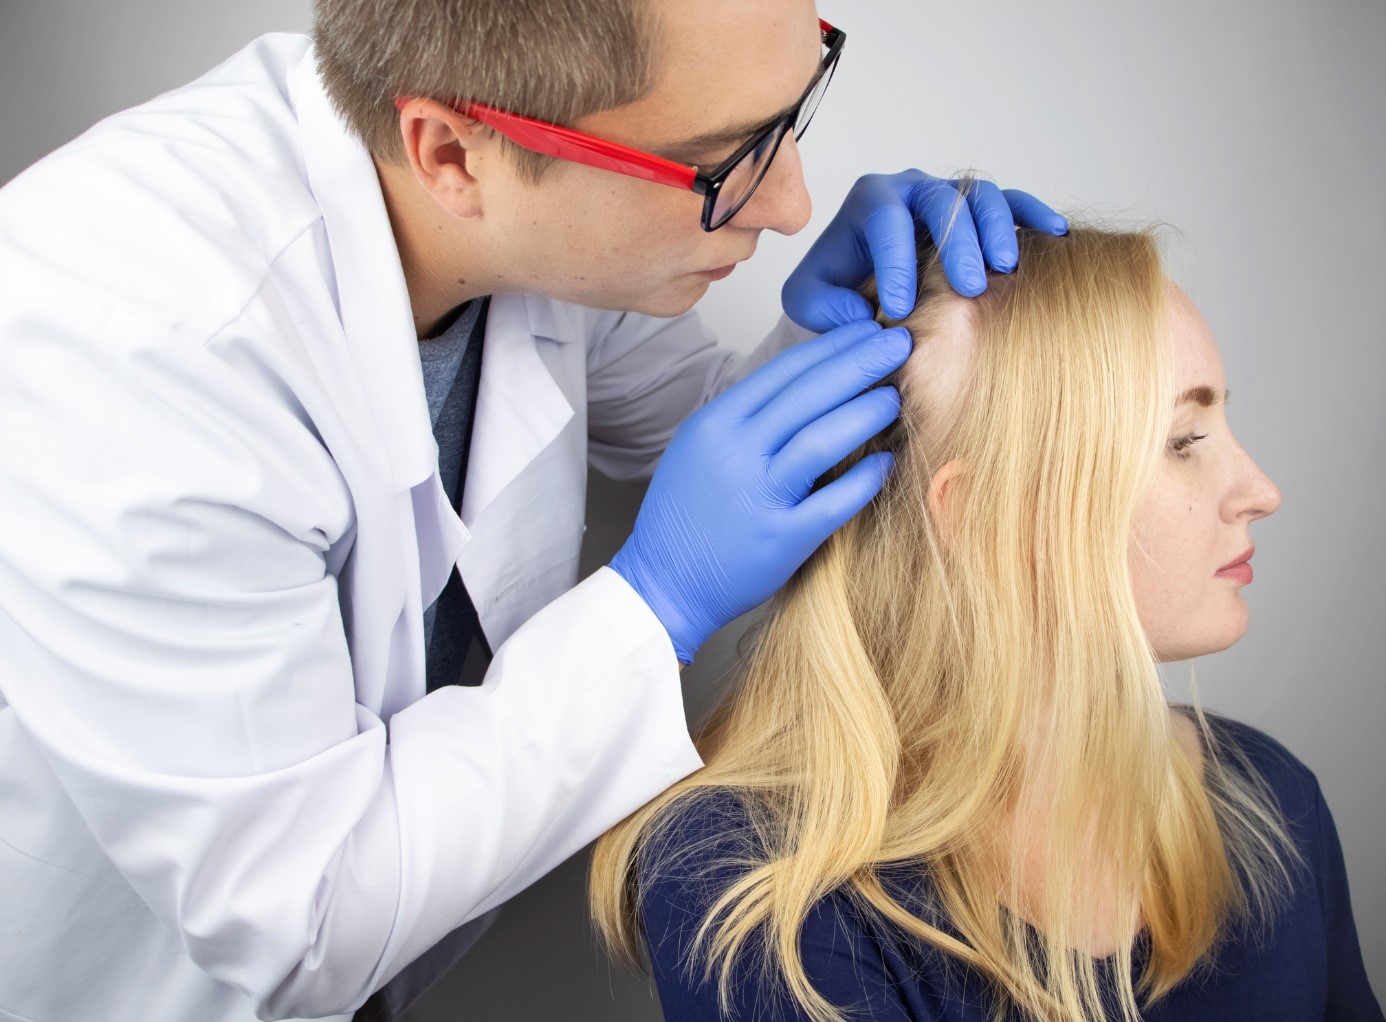 The doctor examines the condition of the hair, its quality and its loss